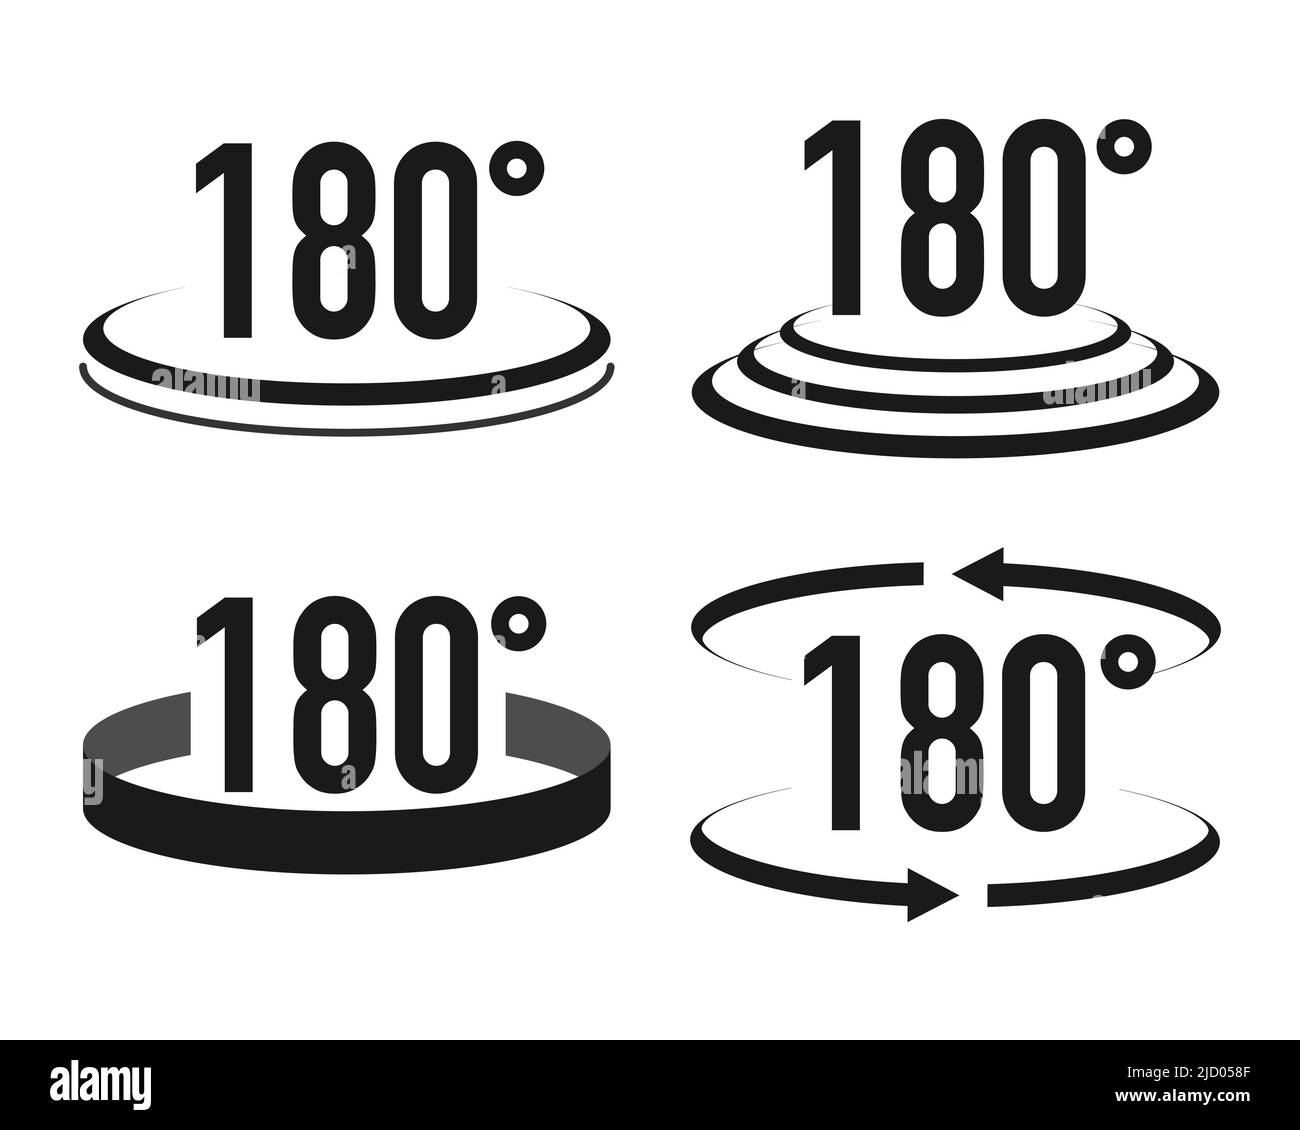 Set of 180 degrees view icons in different style. Vector illustration. Stock Vector